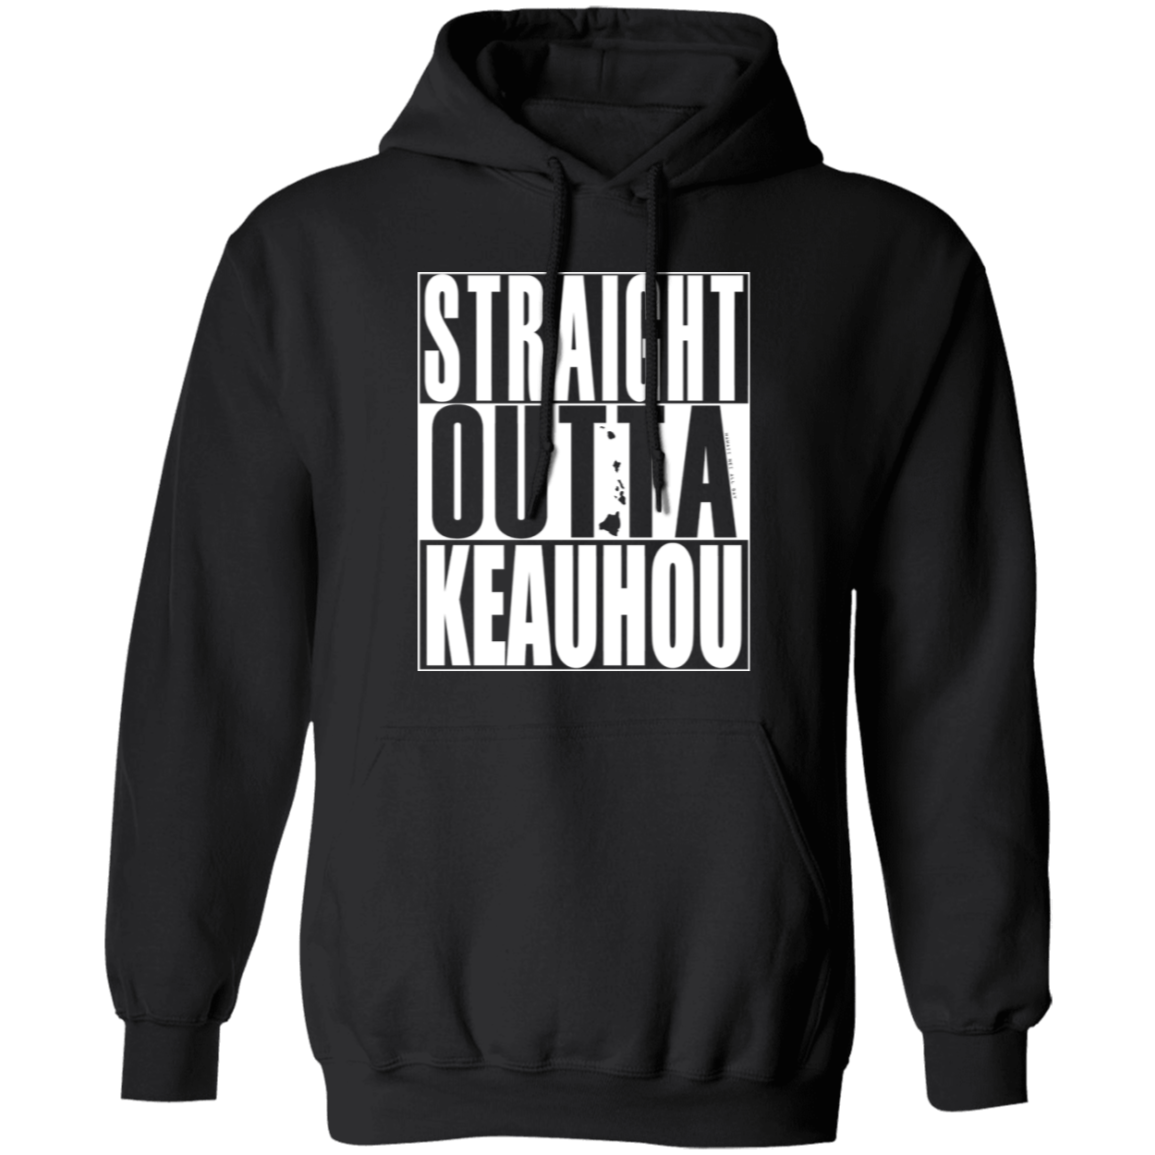 Straight Outta Keauhou (white ink) Pullover Hoodie